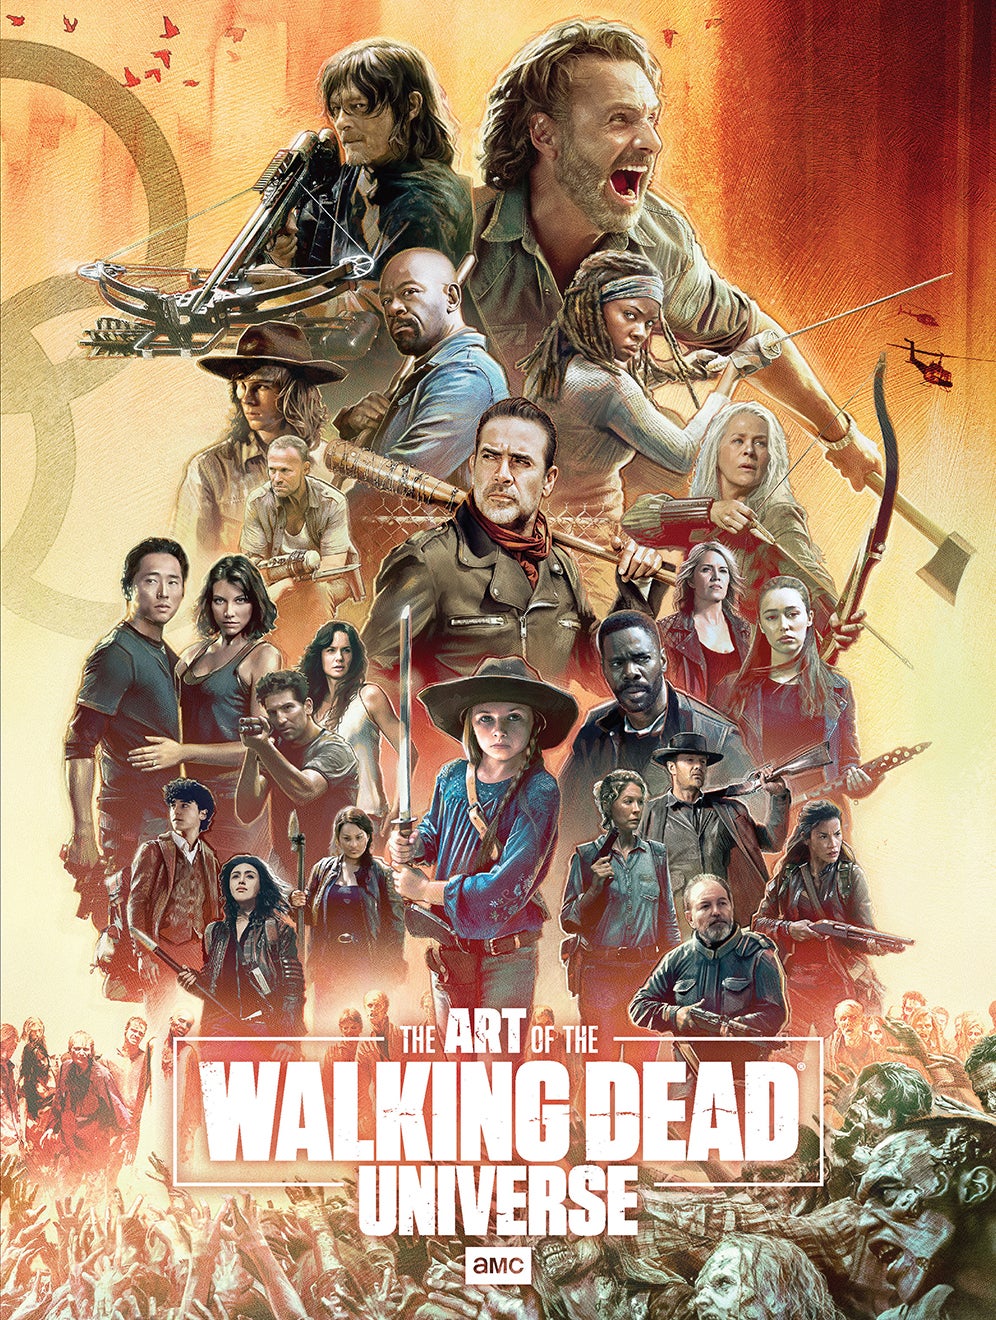 Full cover of The Art Of The Walking Dead Universe (Image: AMC/Brian Rood)